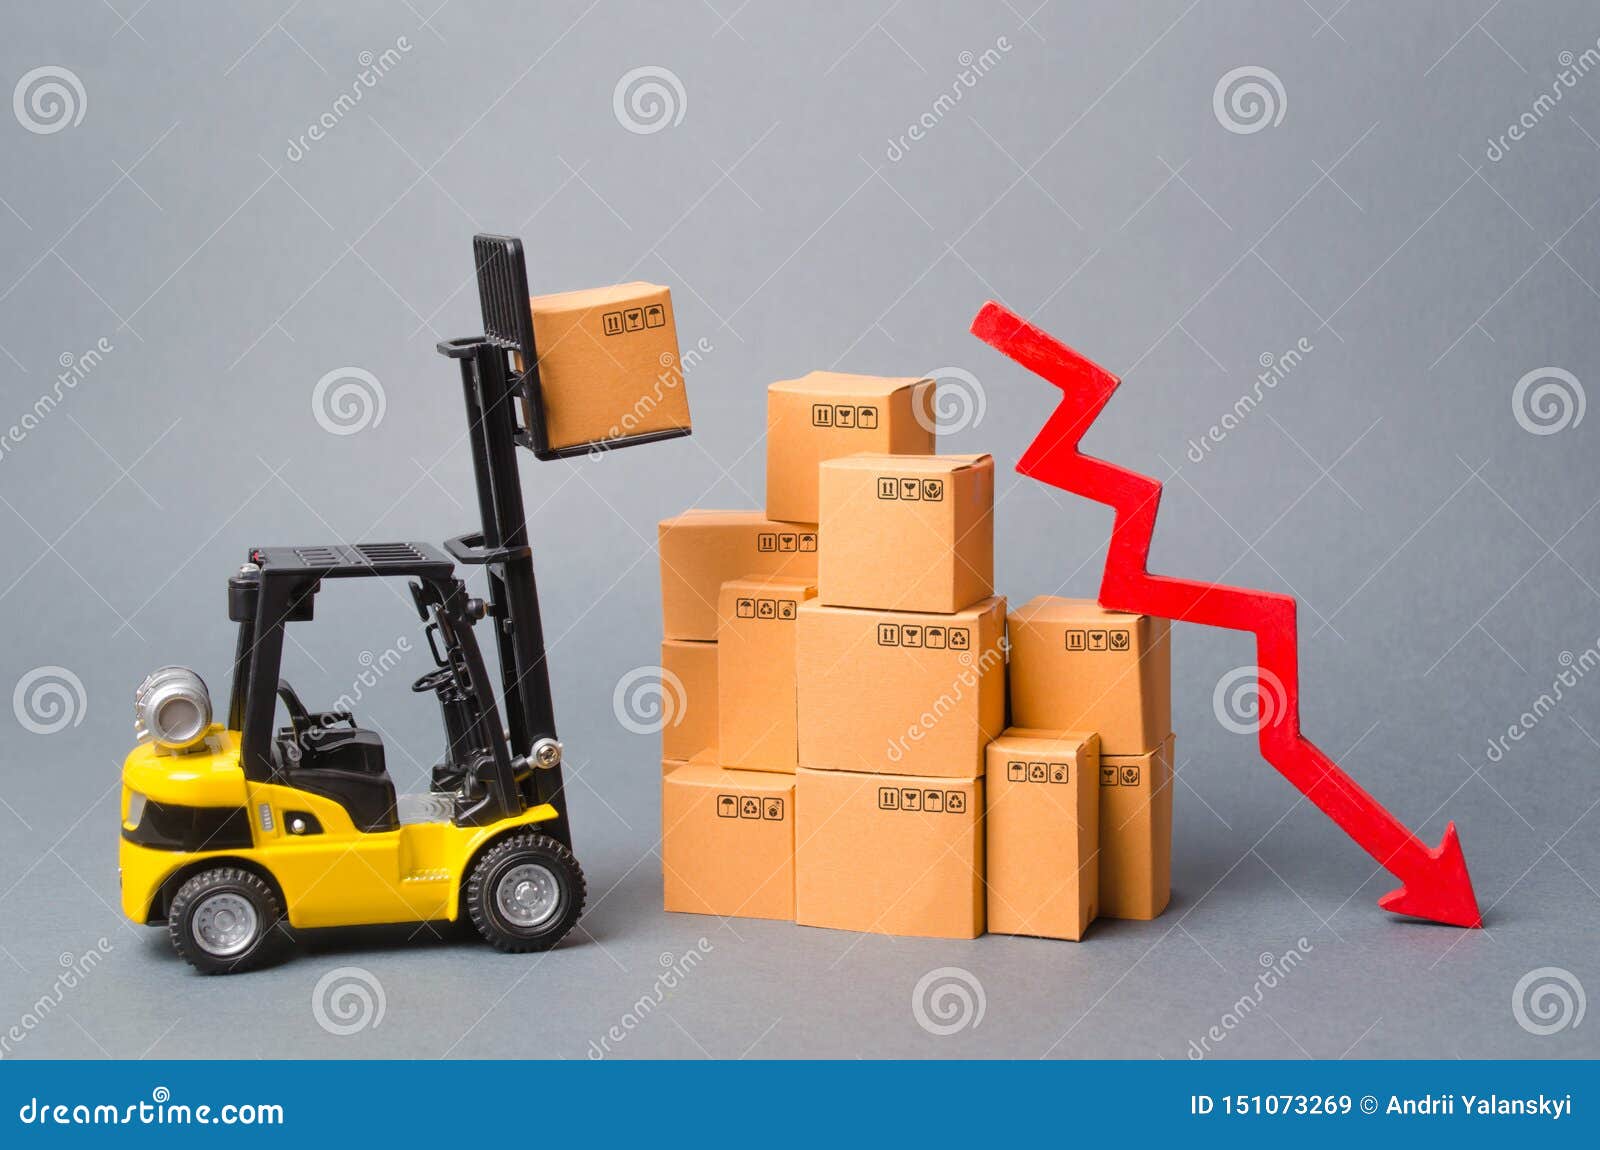 Yellow Forklift Truck Truckraises A Box Over A Stack Of Boxes And Red Arrow Down Decrease In Economic Rates Low Demand For Goods Stock Image Image Of Industry Cardboard 151073269